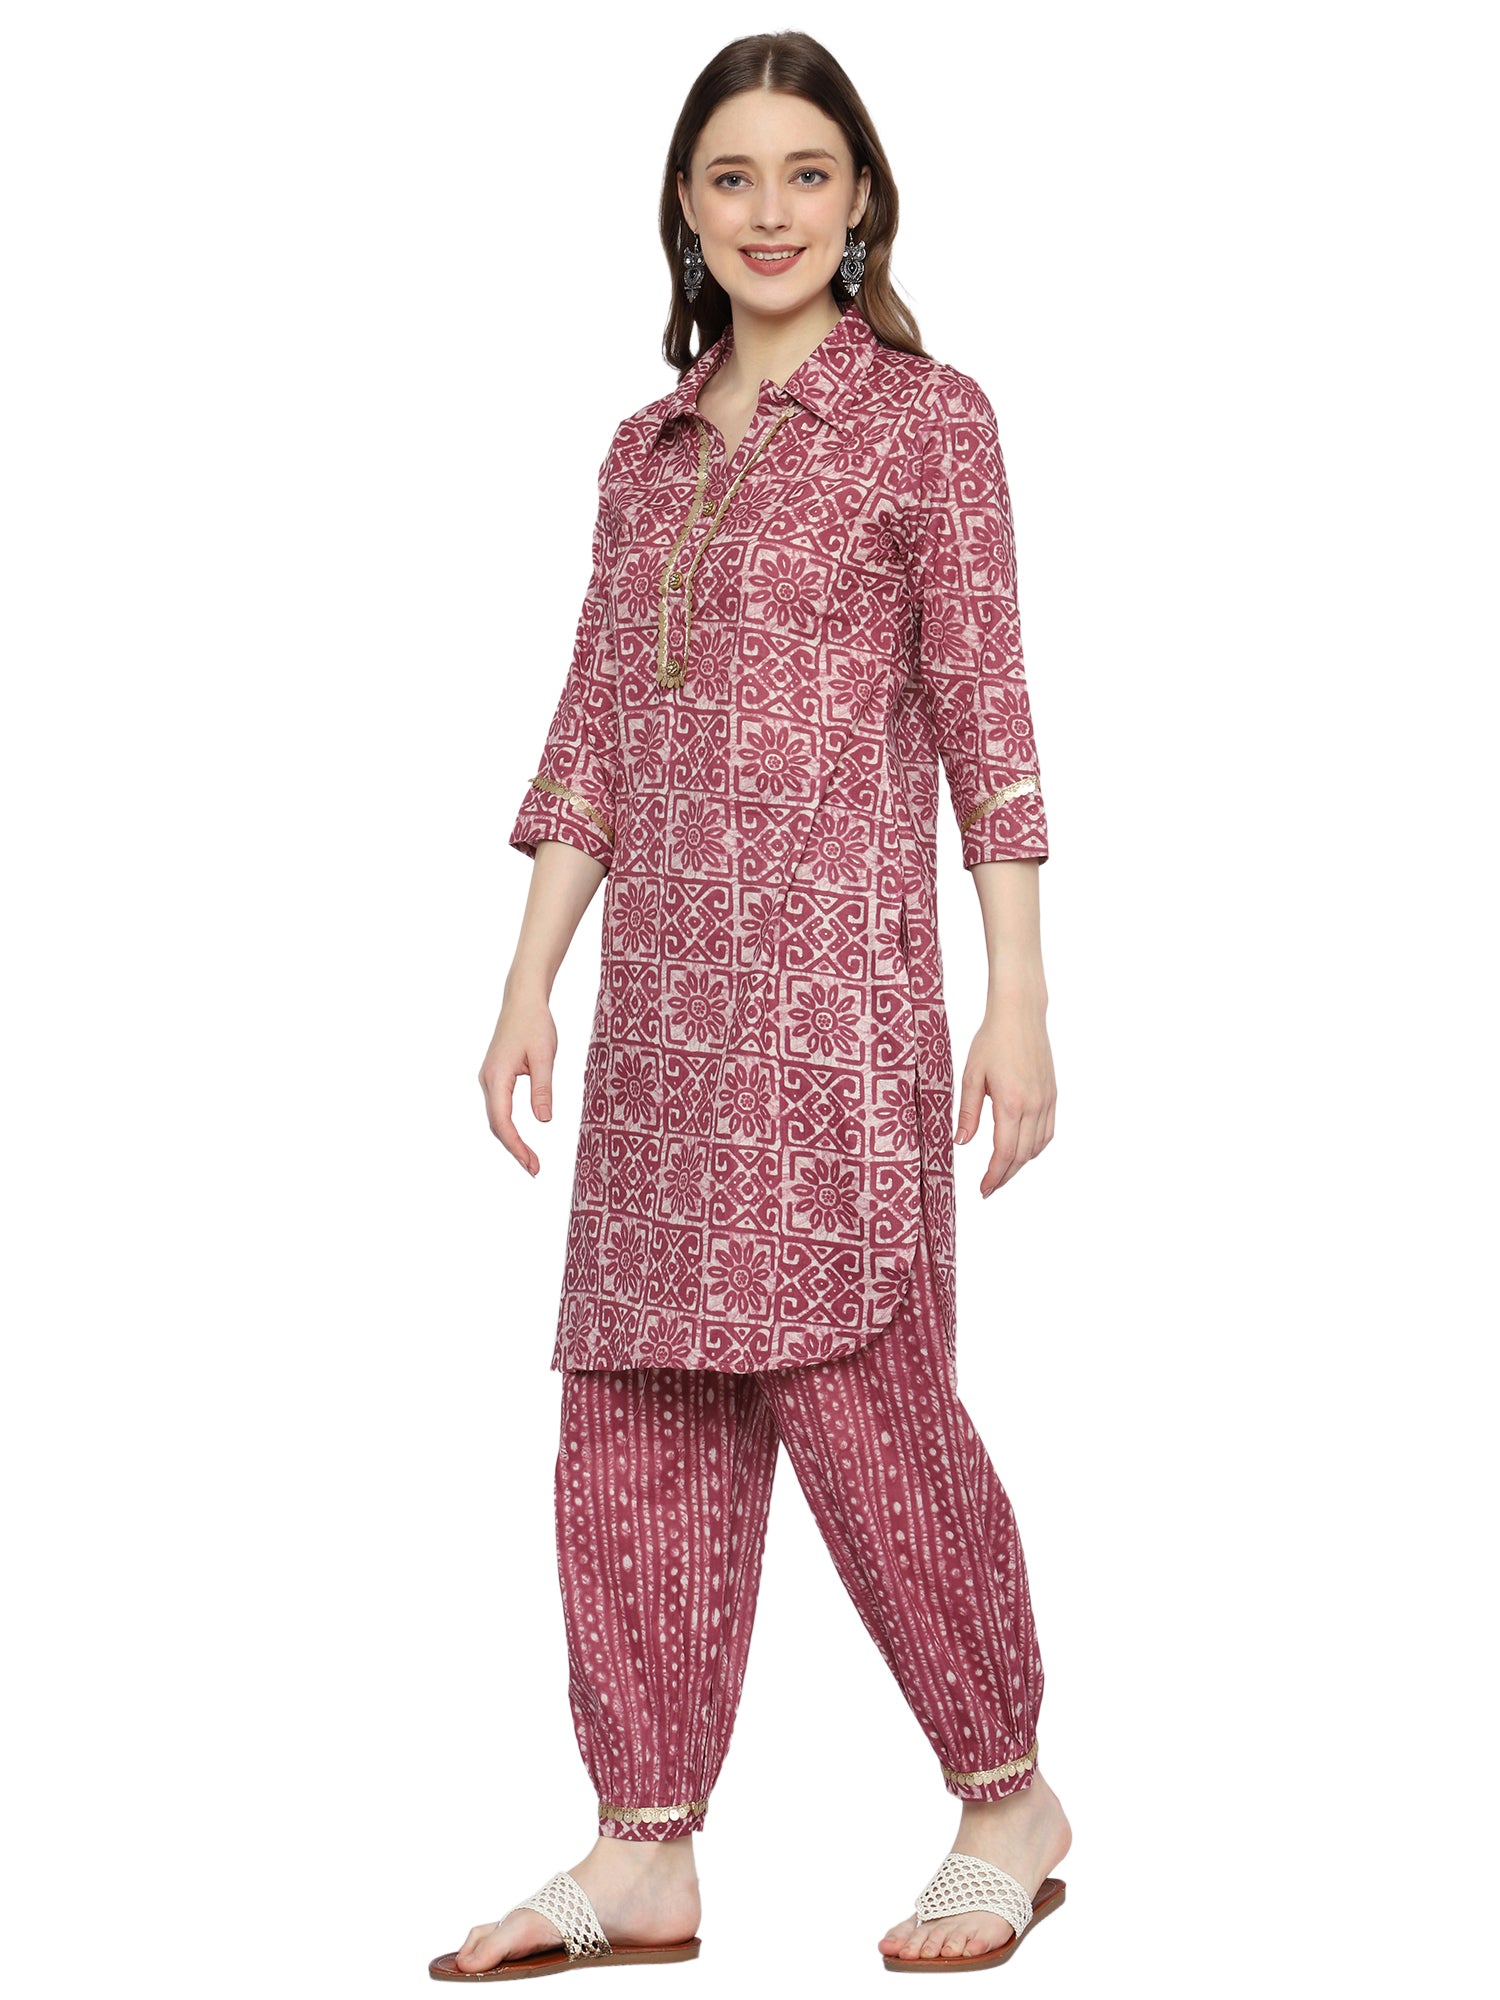 Maroon Rayon Ethnic Co-ord Set with Printed White Lines